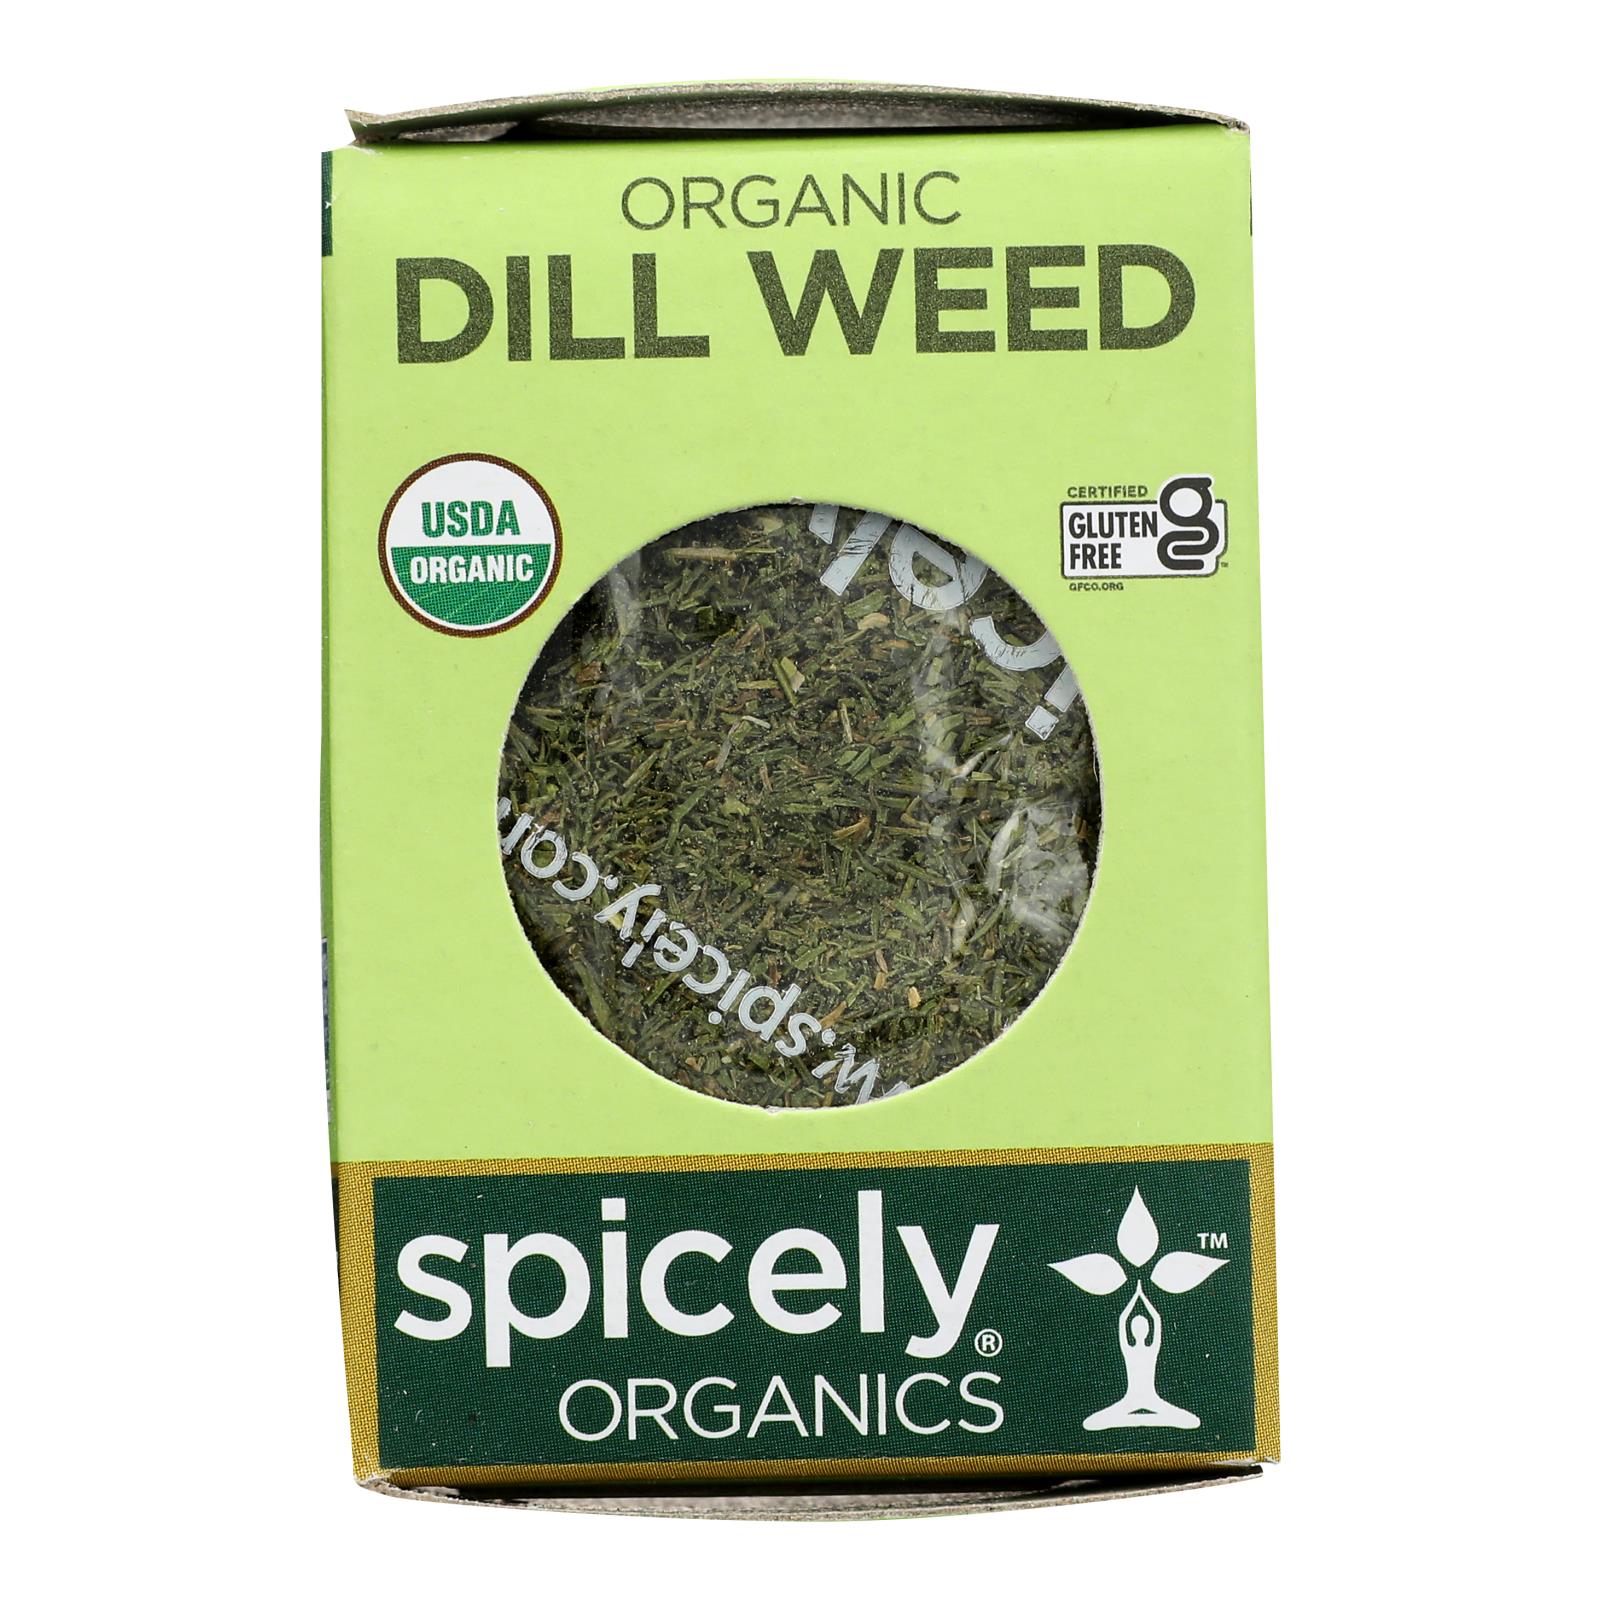 Spicely Organics - Organic Dill Weed - Case Of 6 - 0.1 Oz.